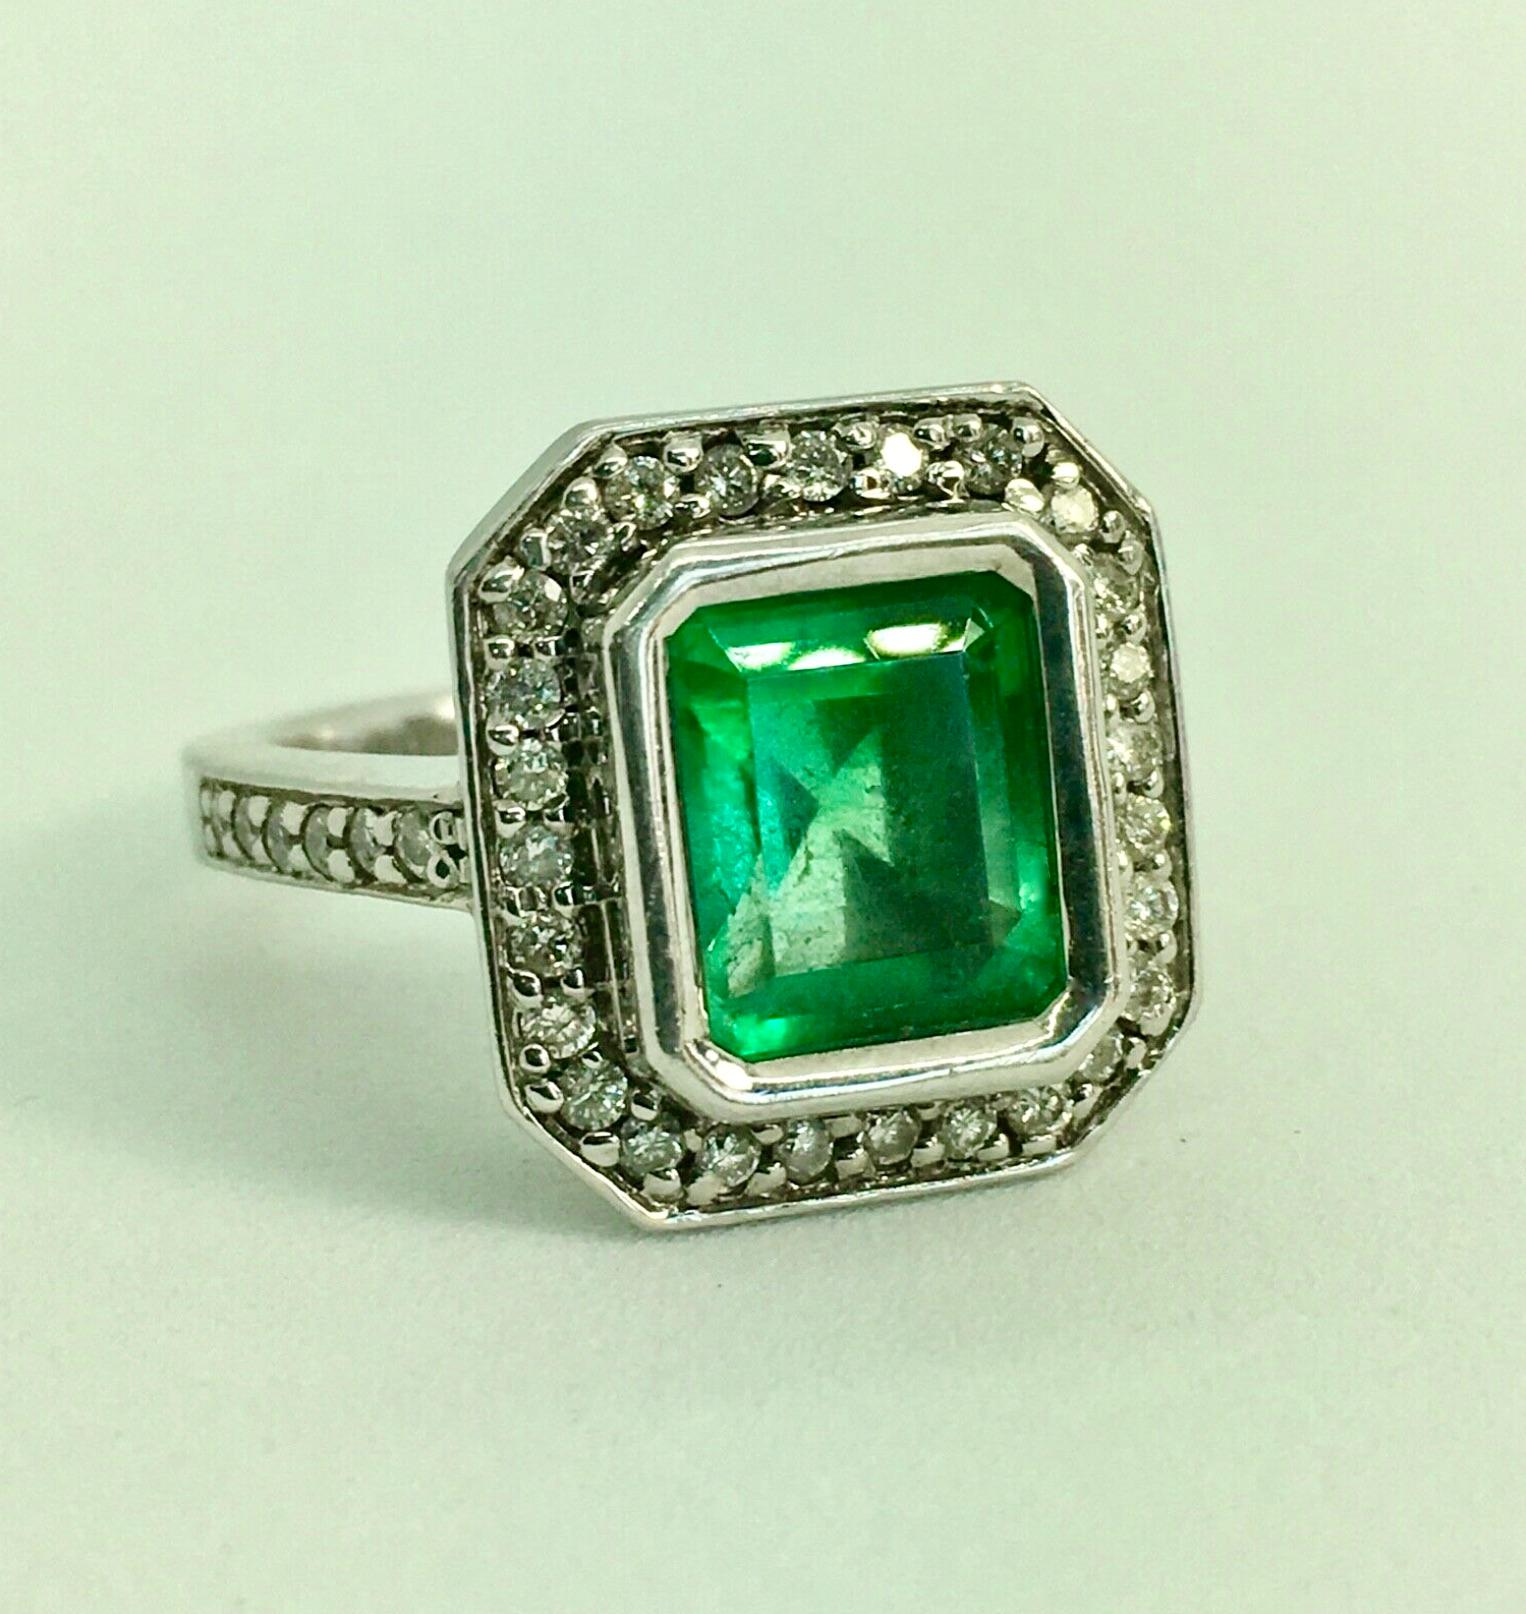 This elegant Art Deco style engagement style ring features a 3.50-carat Colombian emerald emerald cut displaying a vibrant green color. It is accented by a shimmering halo of white round brilliant cut diamonds as well as half way sparkling diamonds